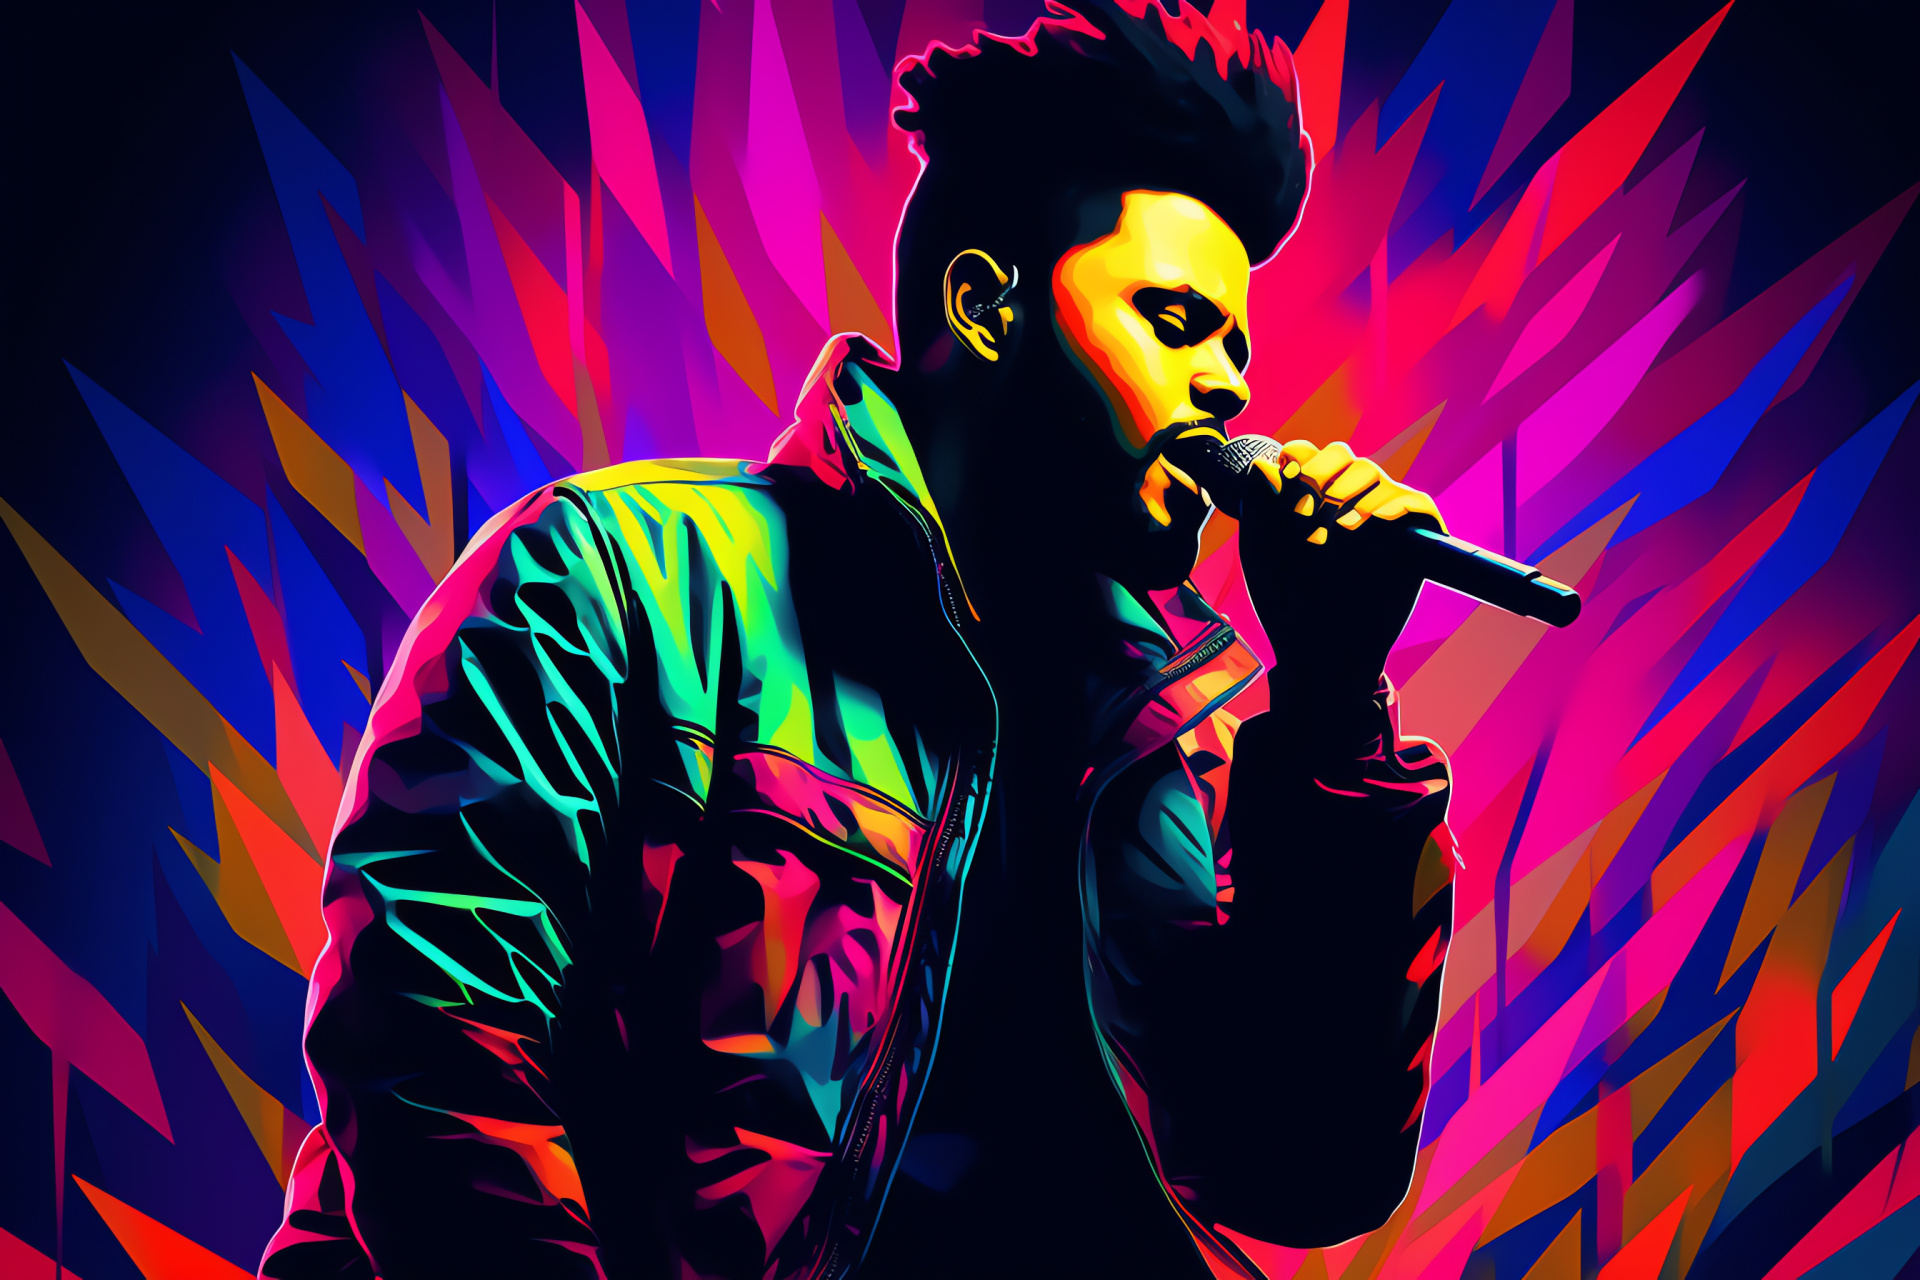 The Weeknd set against abstract geometry, focused intense gaze, assured confident stance, innate performer's charisma, HD Desktop Image